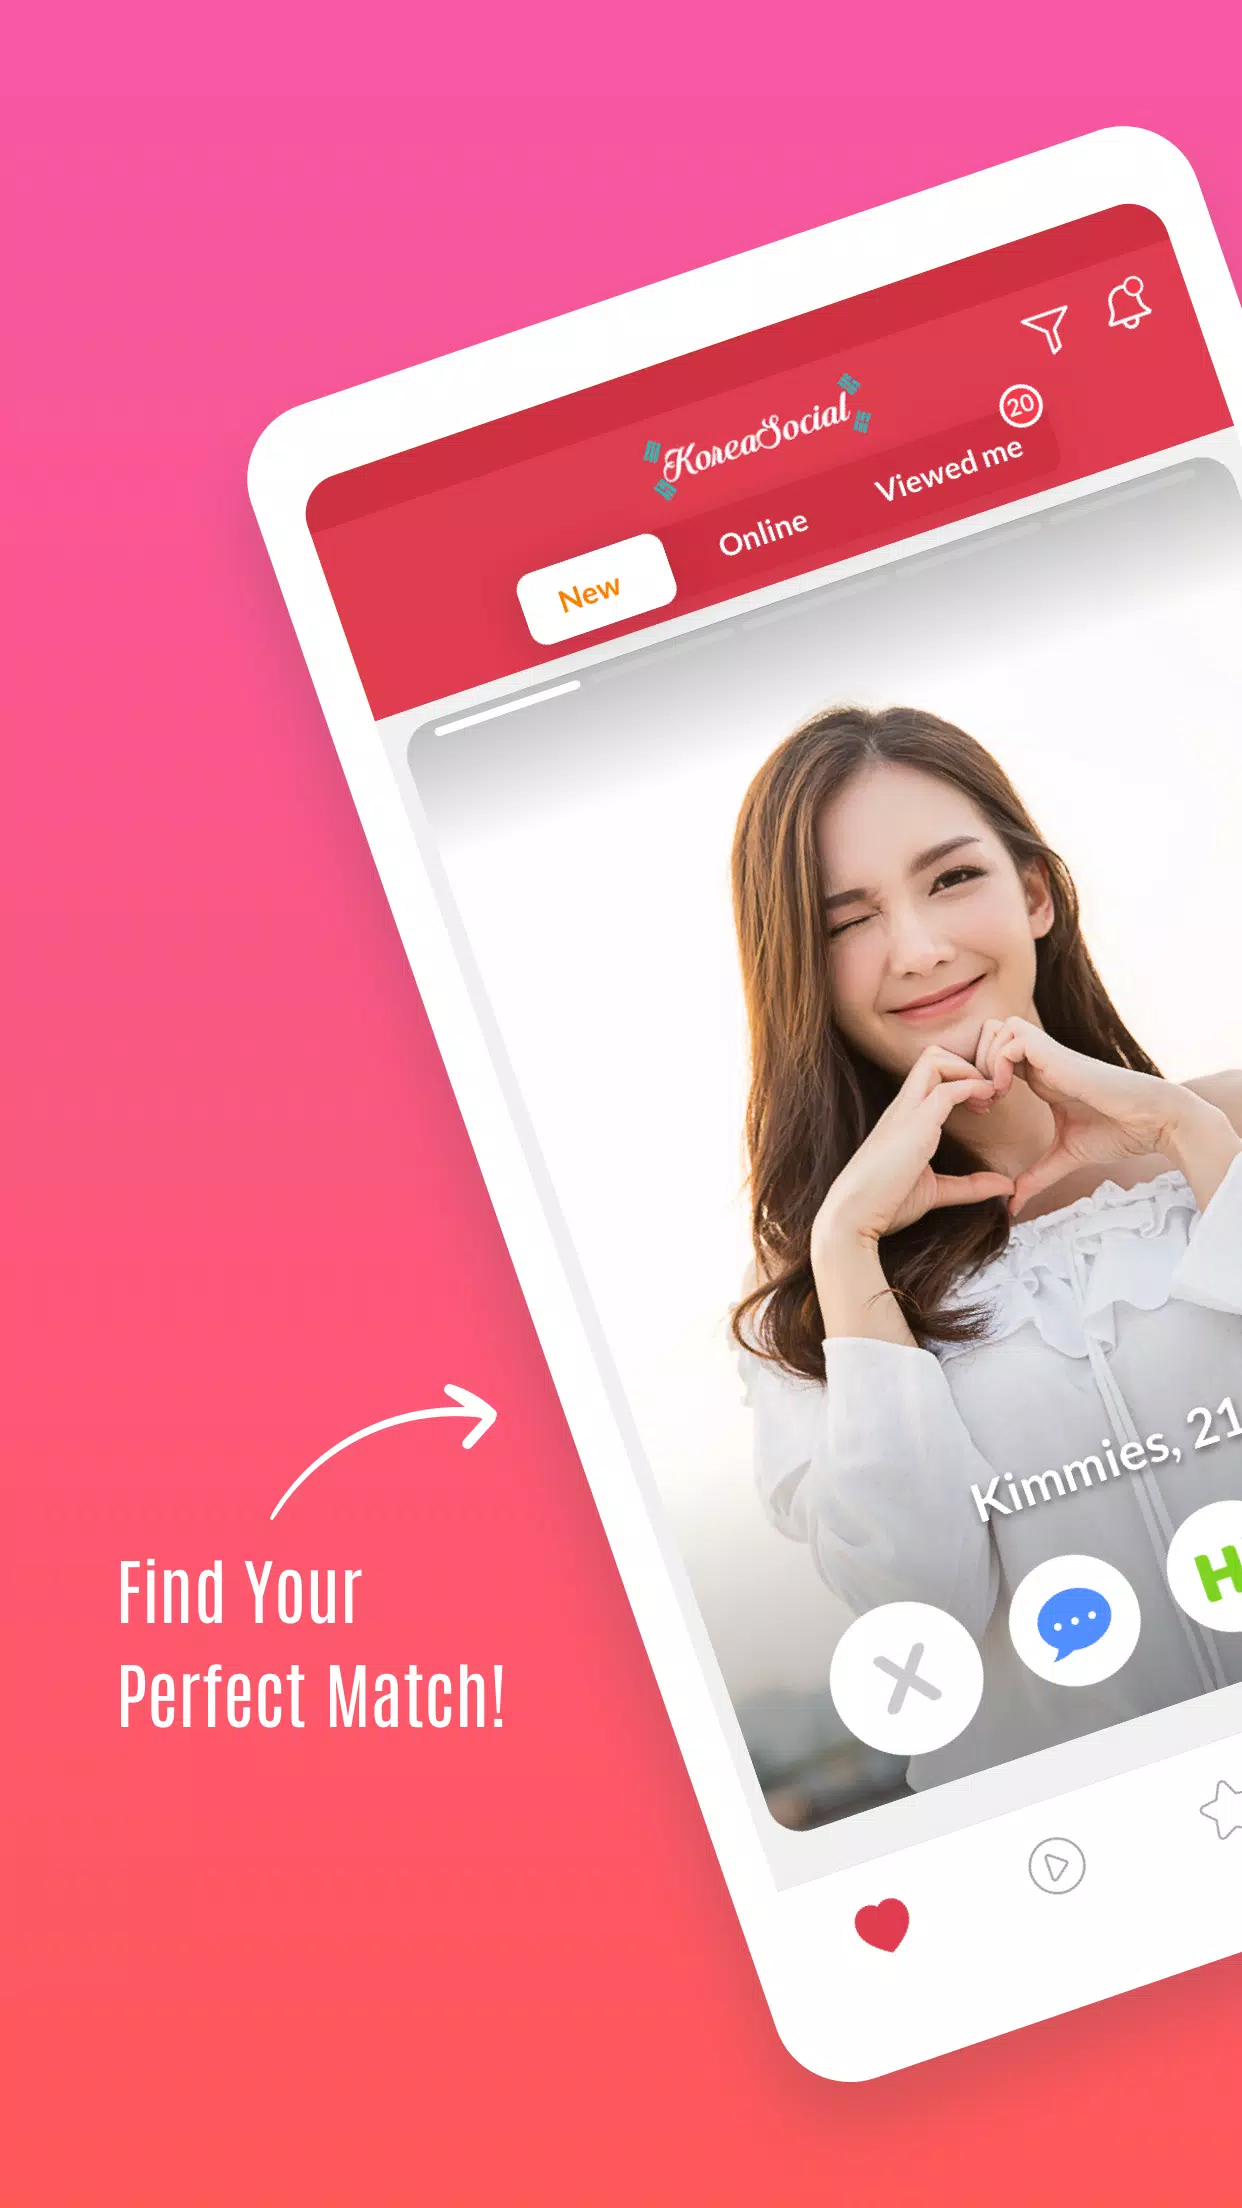 what dating apps do koreans use